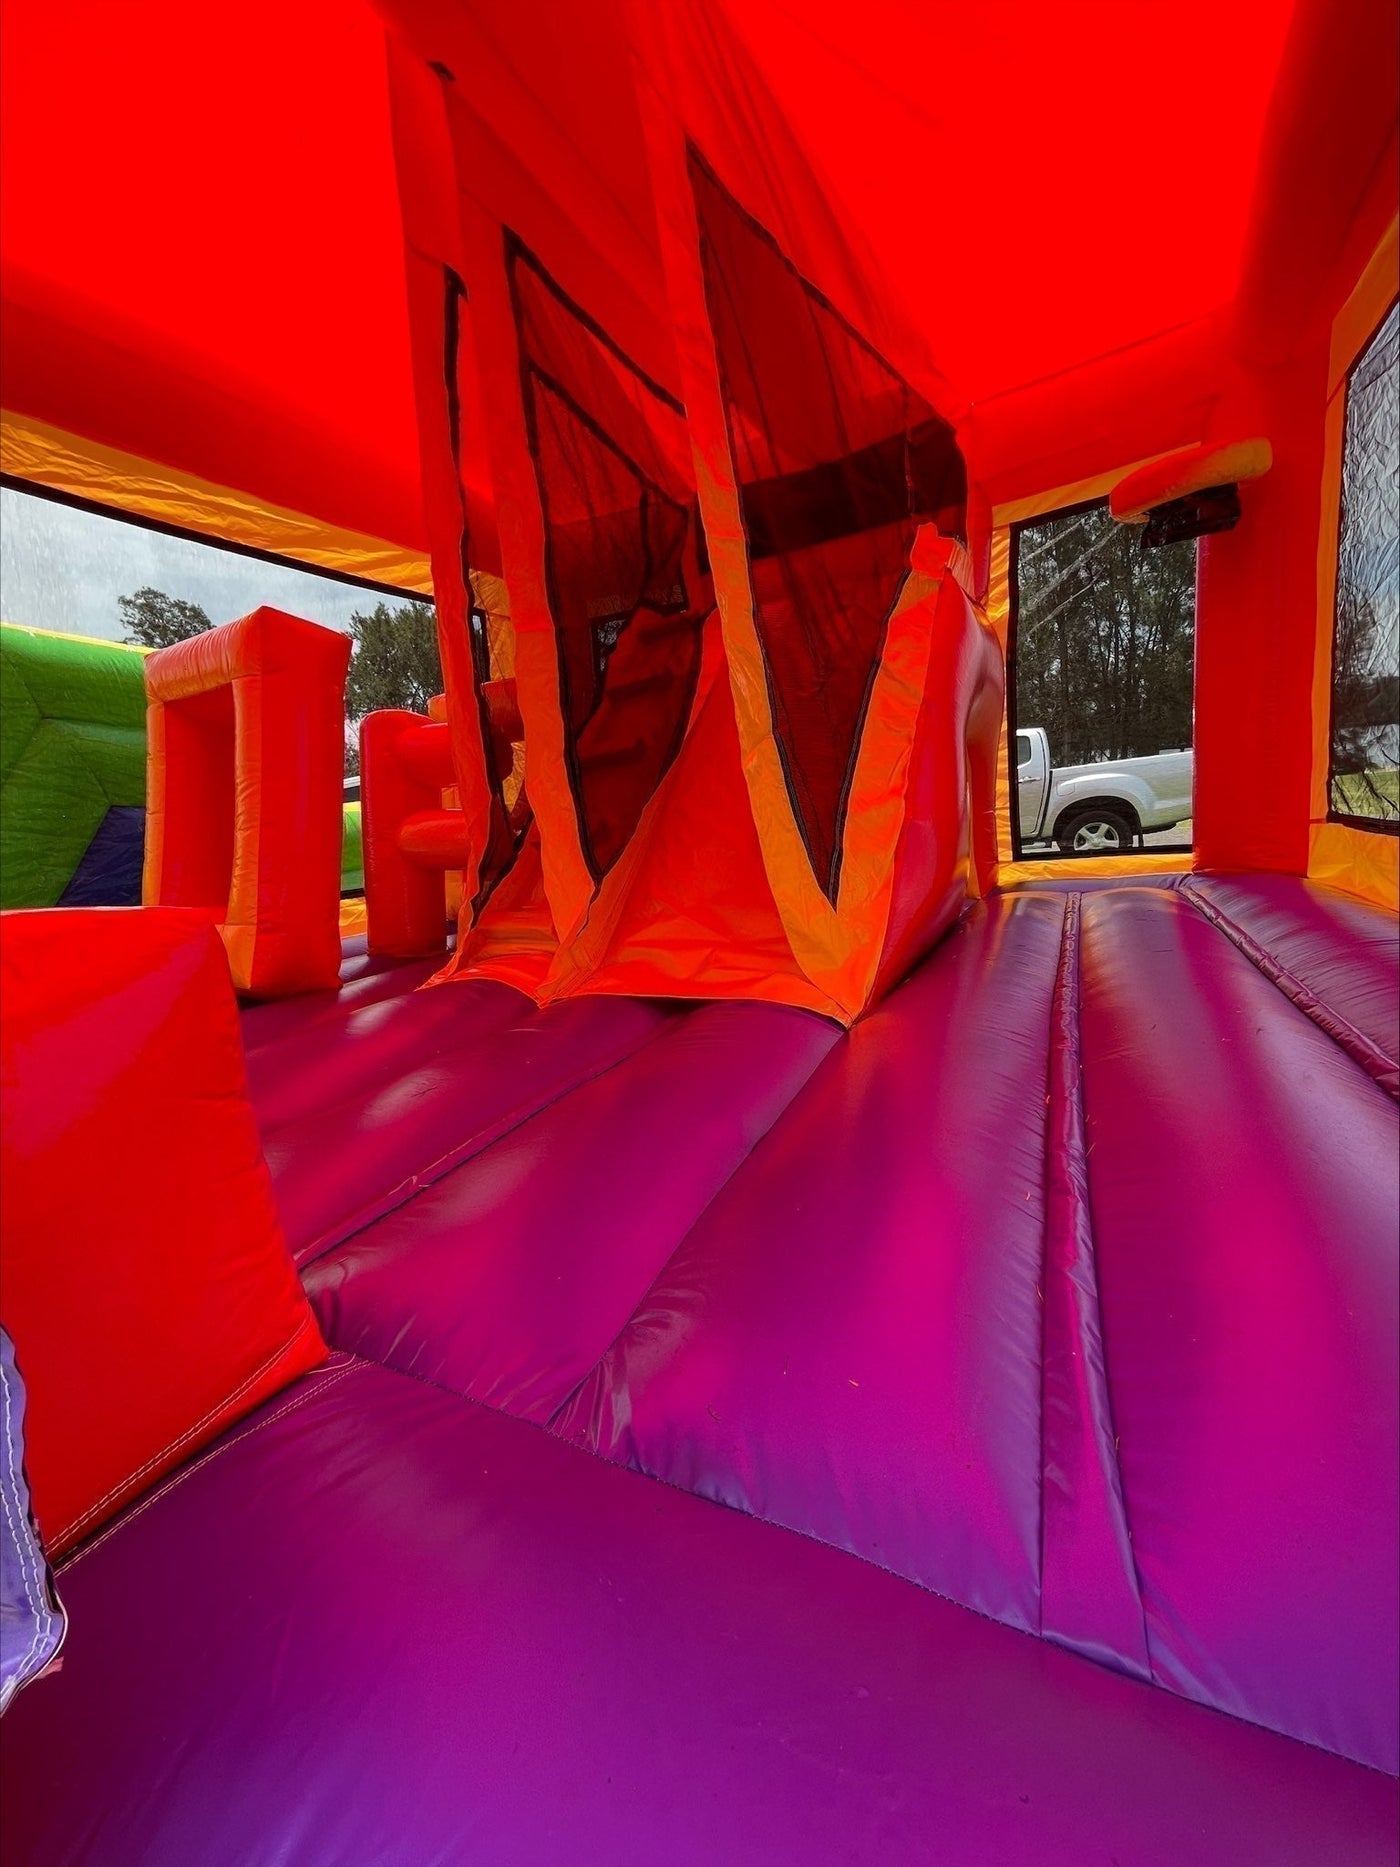 Christmas #9 Extra Large Obstacle Combo Jumping Castle